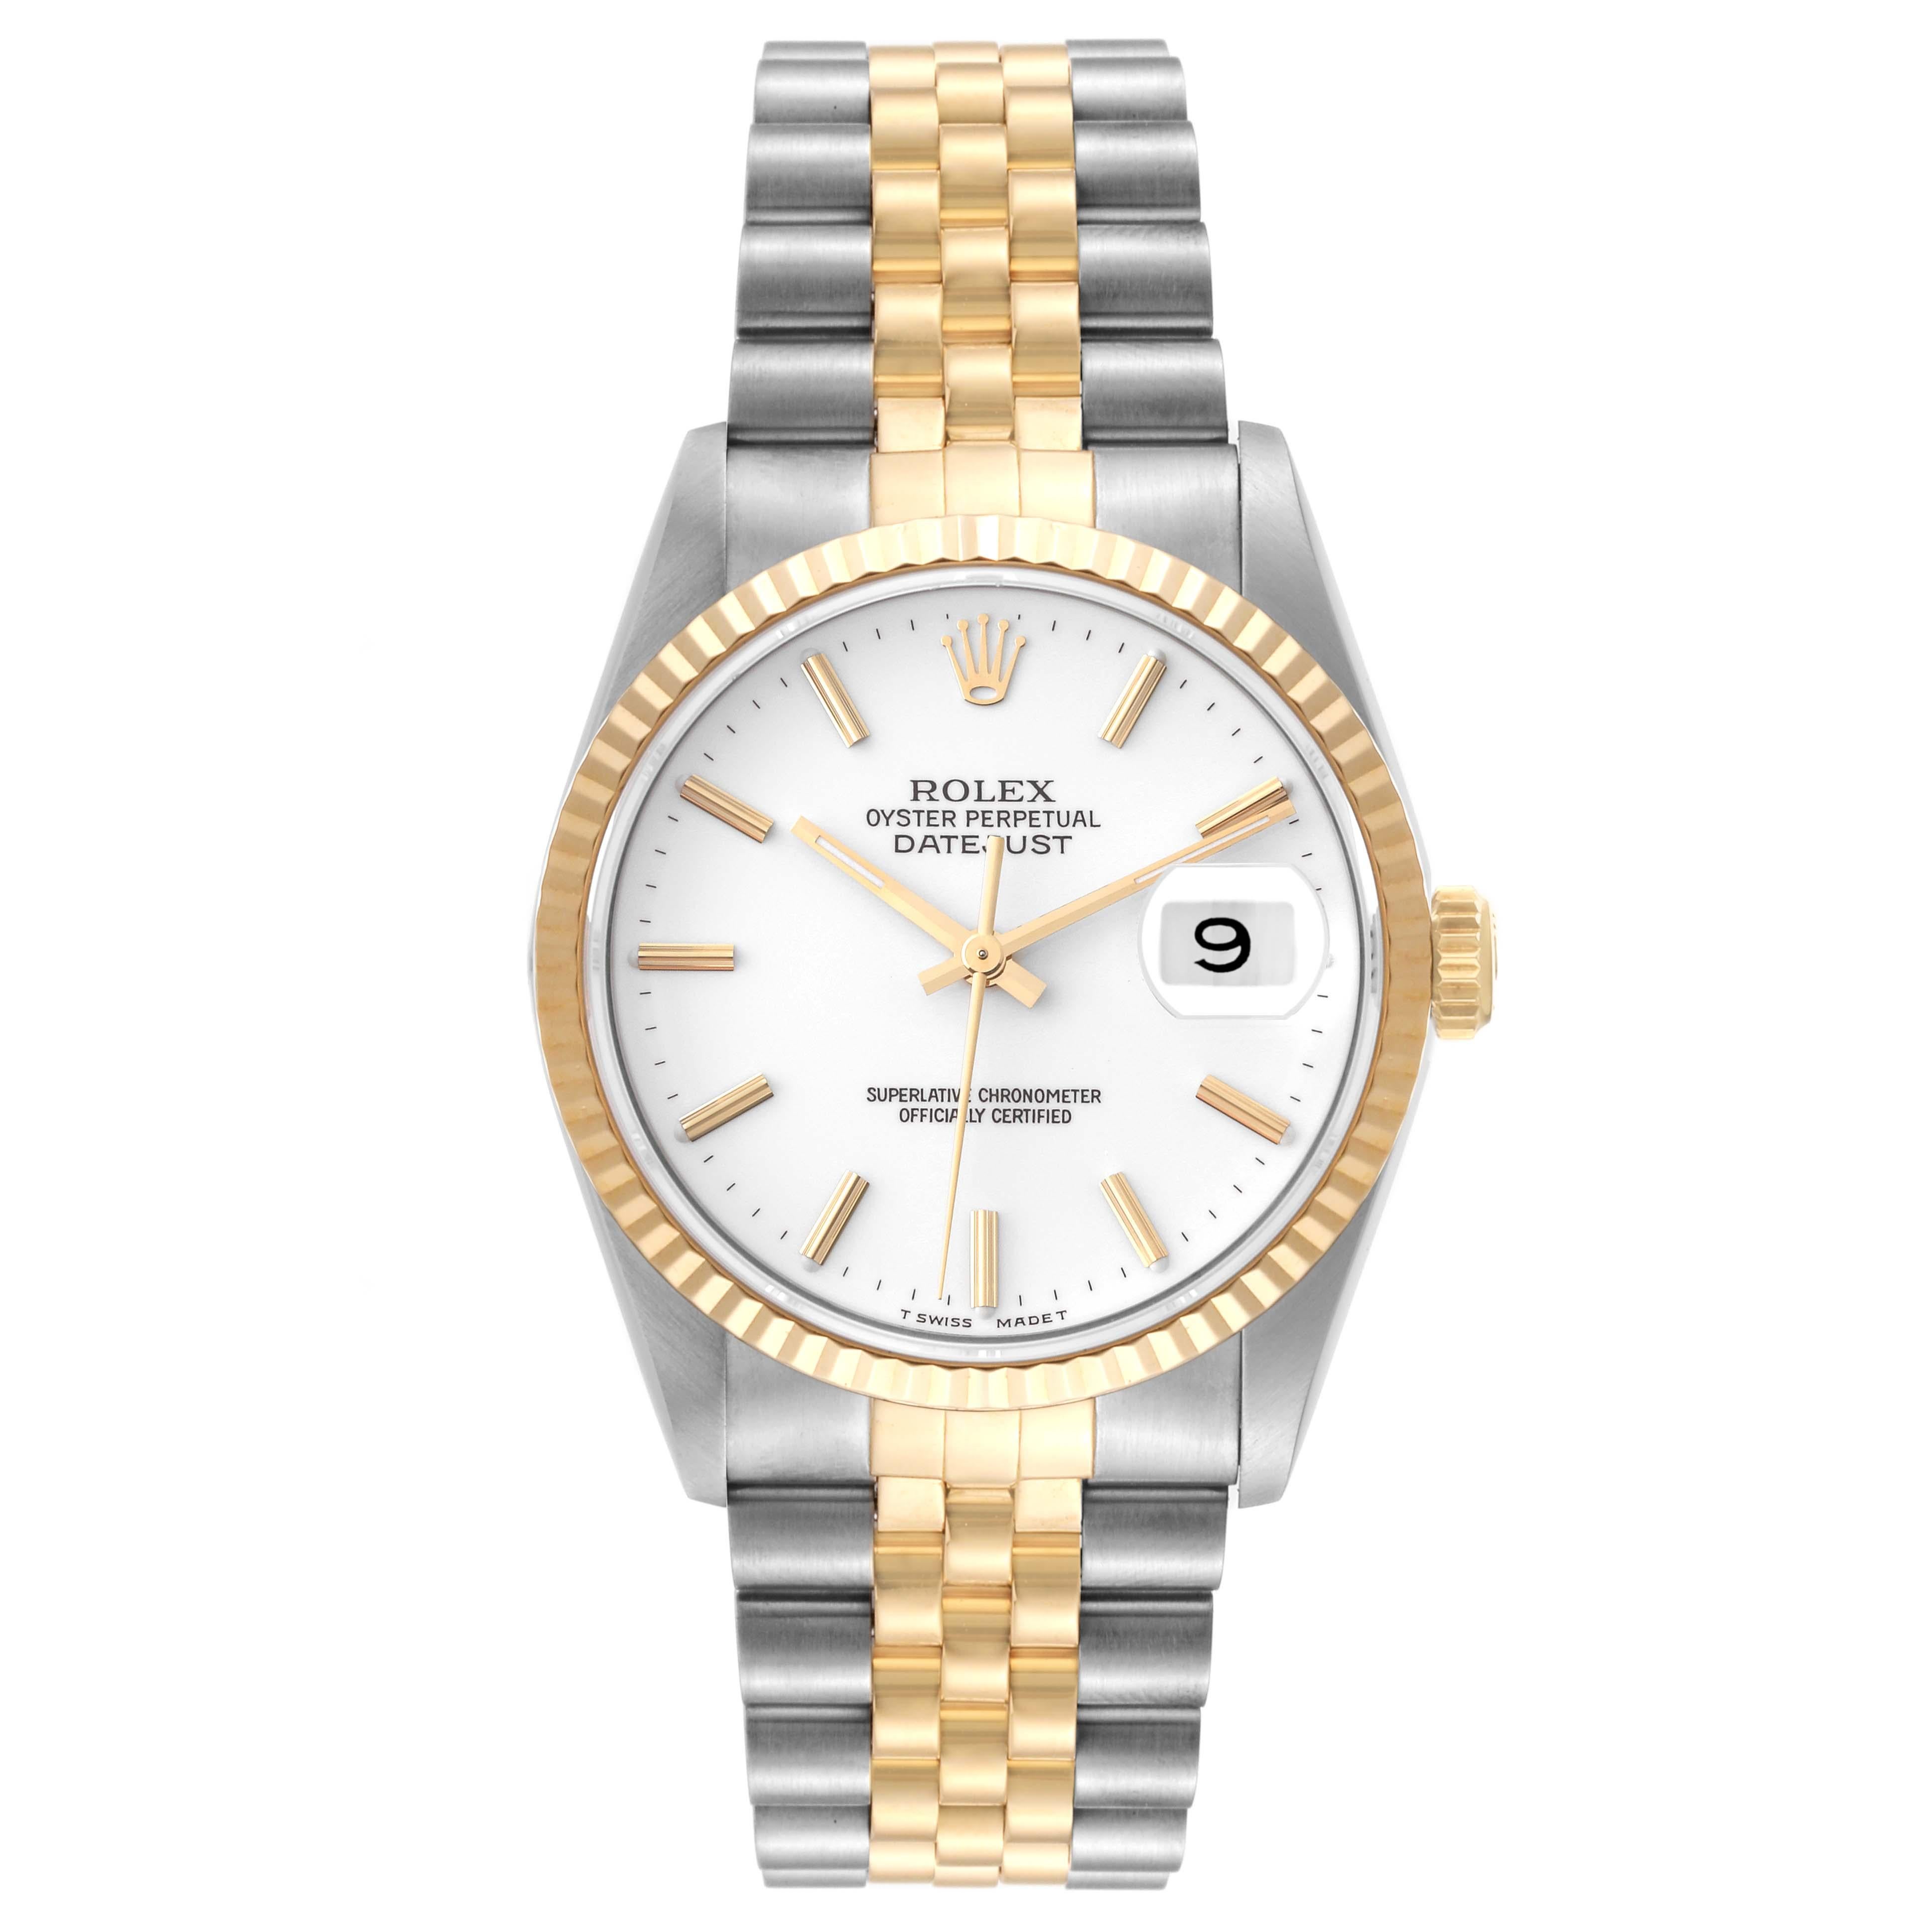 Rolex Datejust Steel Yellow Gold White Dial Mens Watch 16233. Officially certified chronometer automatic self-winding movement. Stainless steel case 36 mm in diameter.  Rolex logo on an 18K yellow gold crown. 18k yellow gold fluted bezel. Scratch